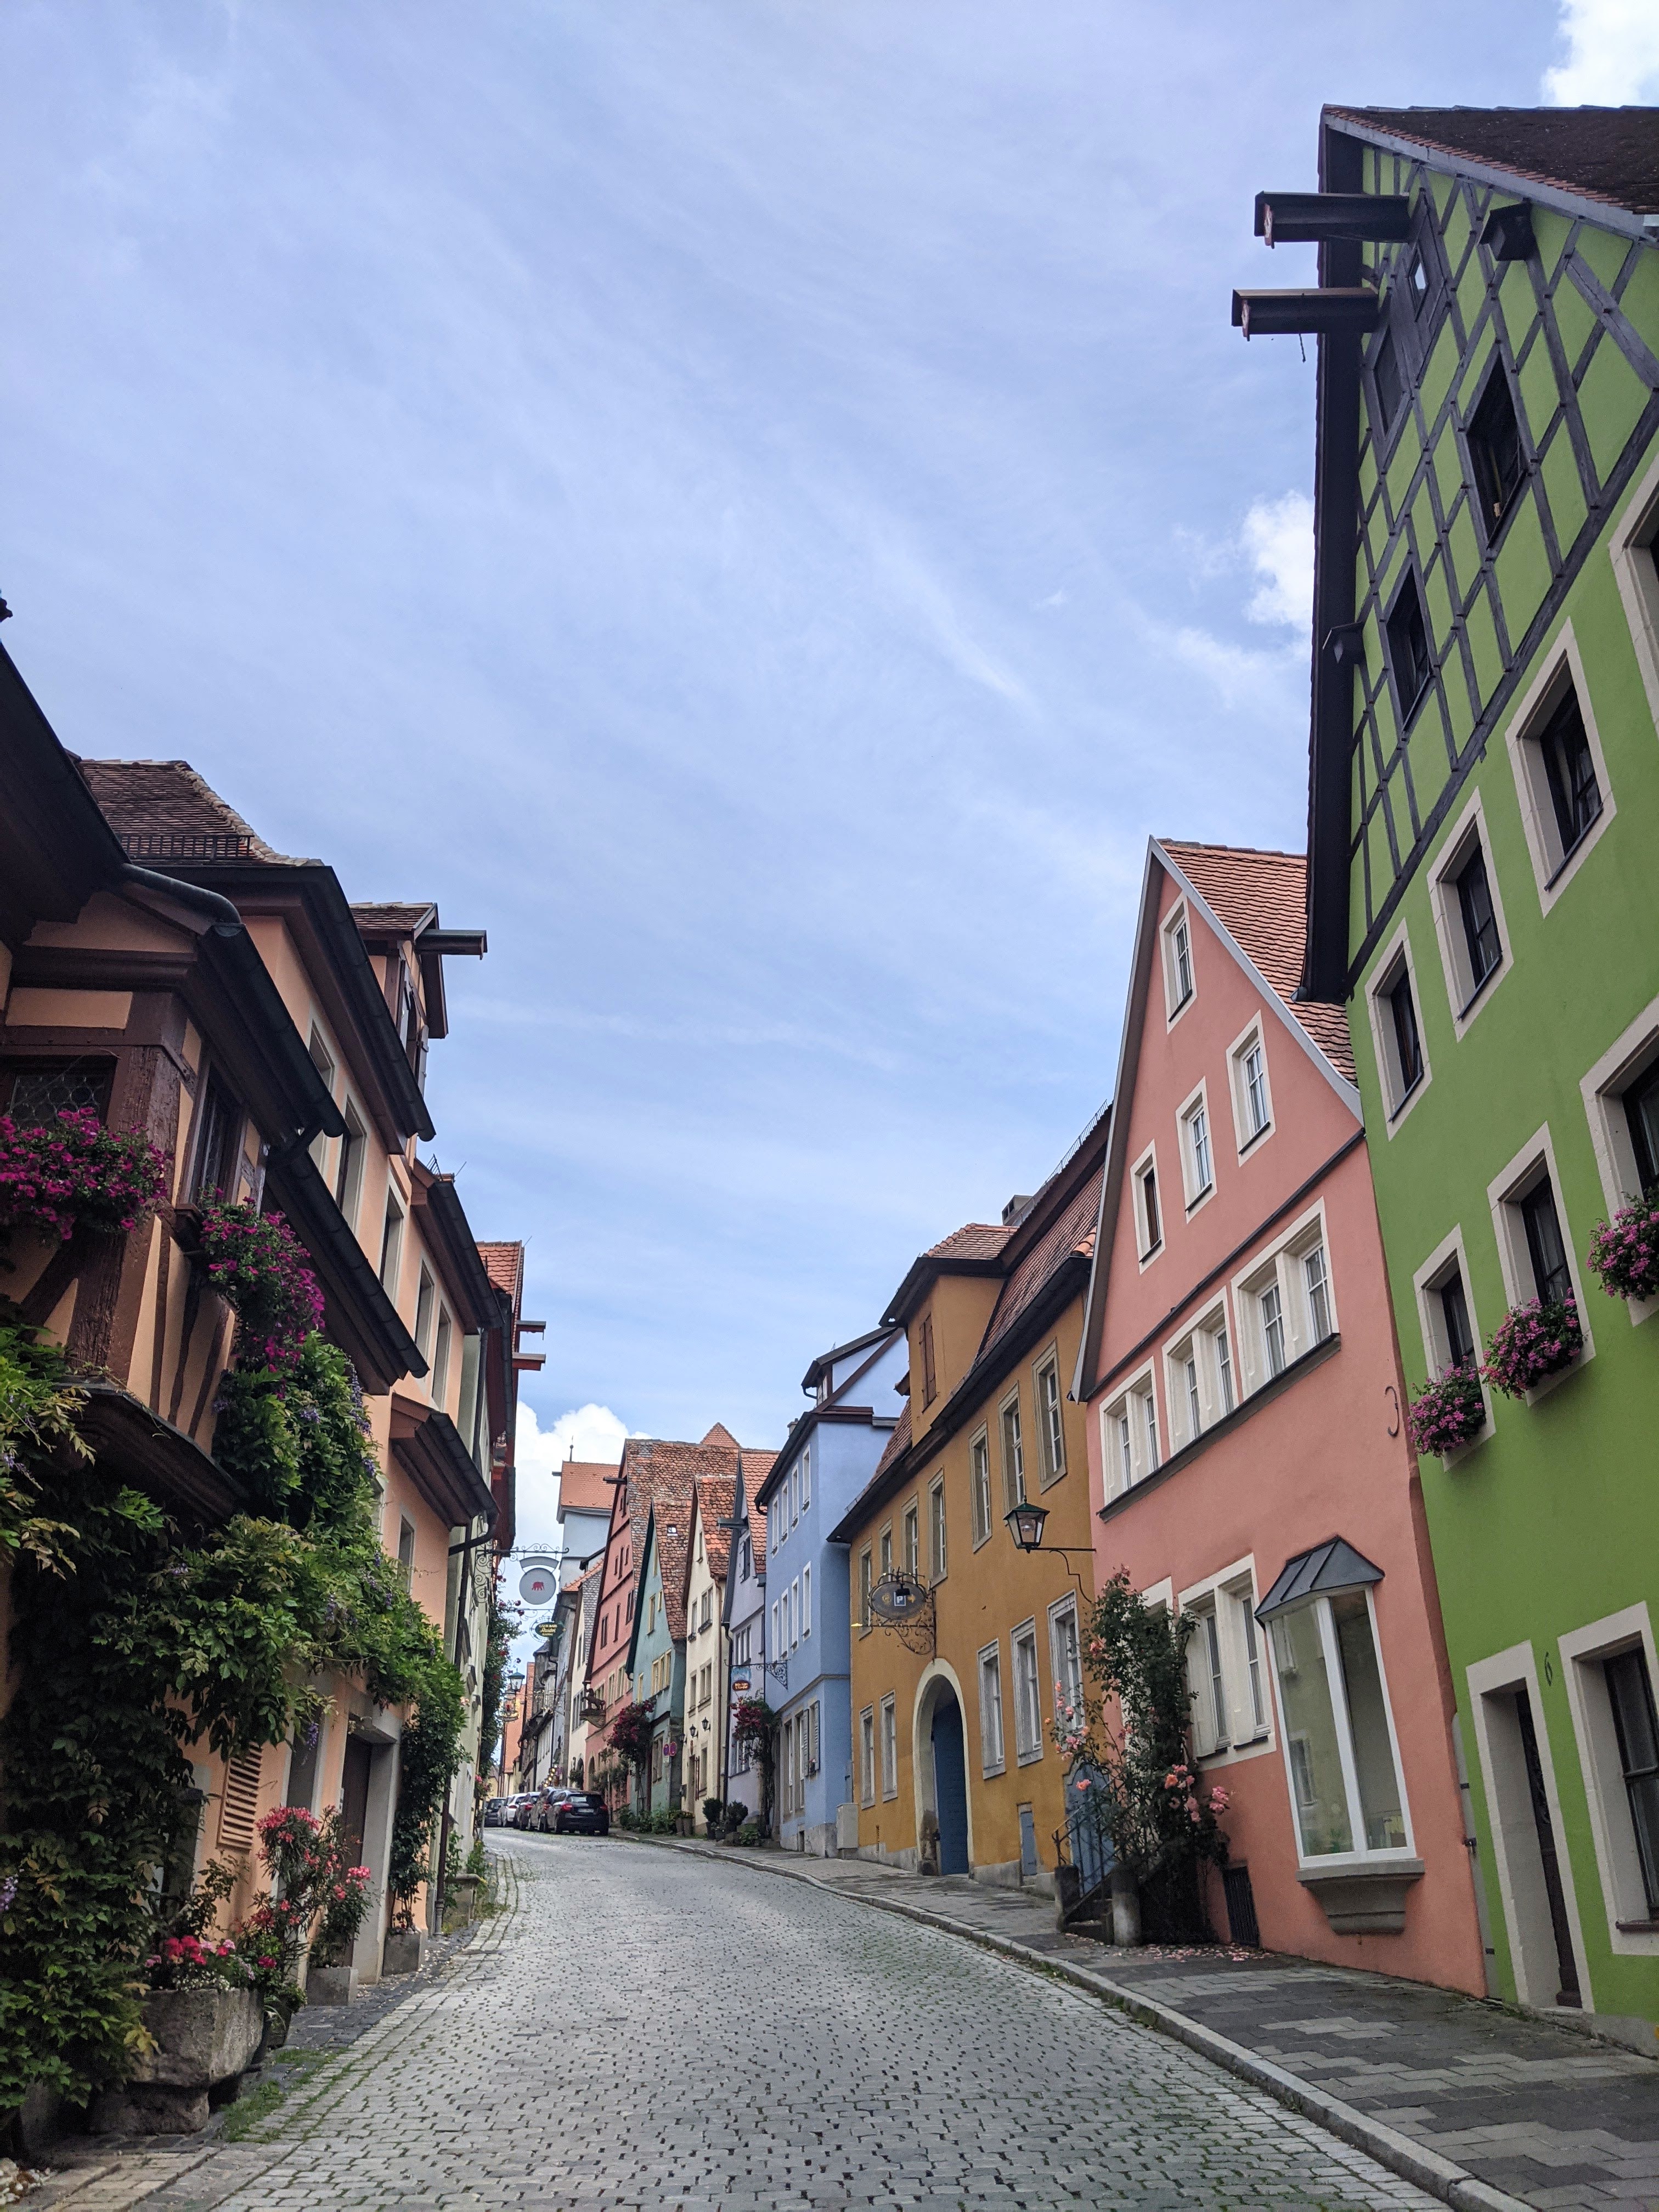 color-laura-roa-a-quiet-street-in-rothenburg-ob-der-tauber-rothenburg,-germany.jpg